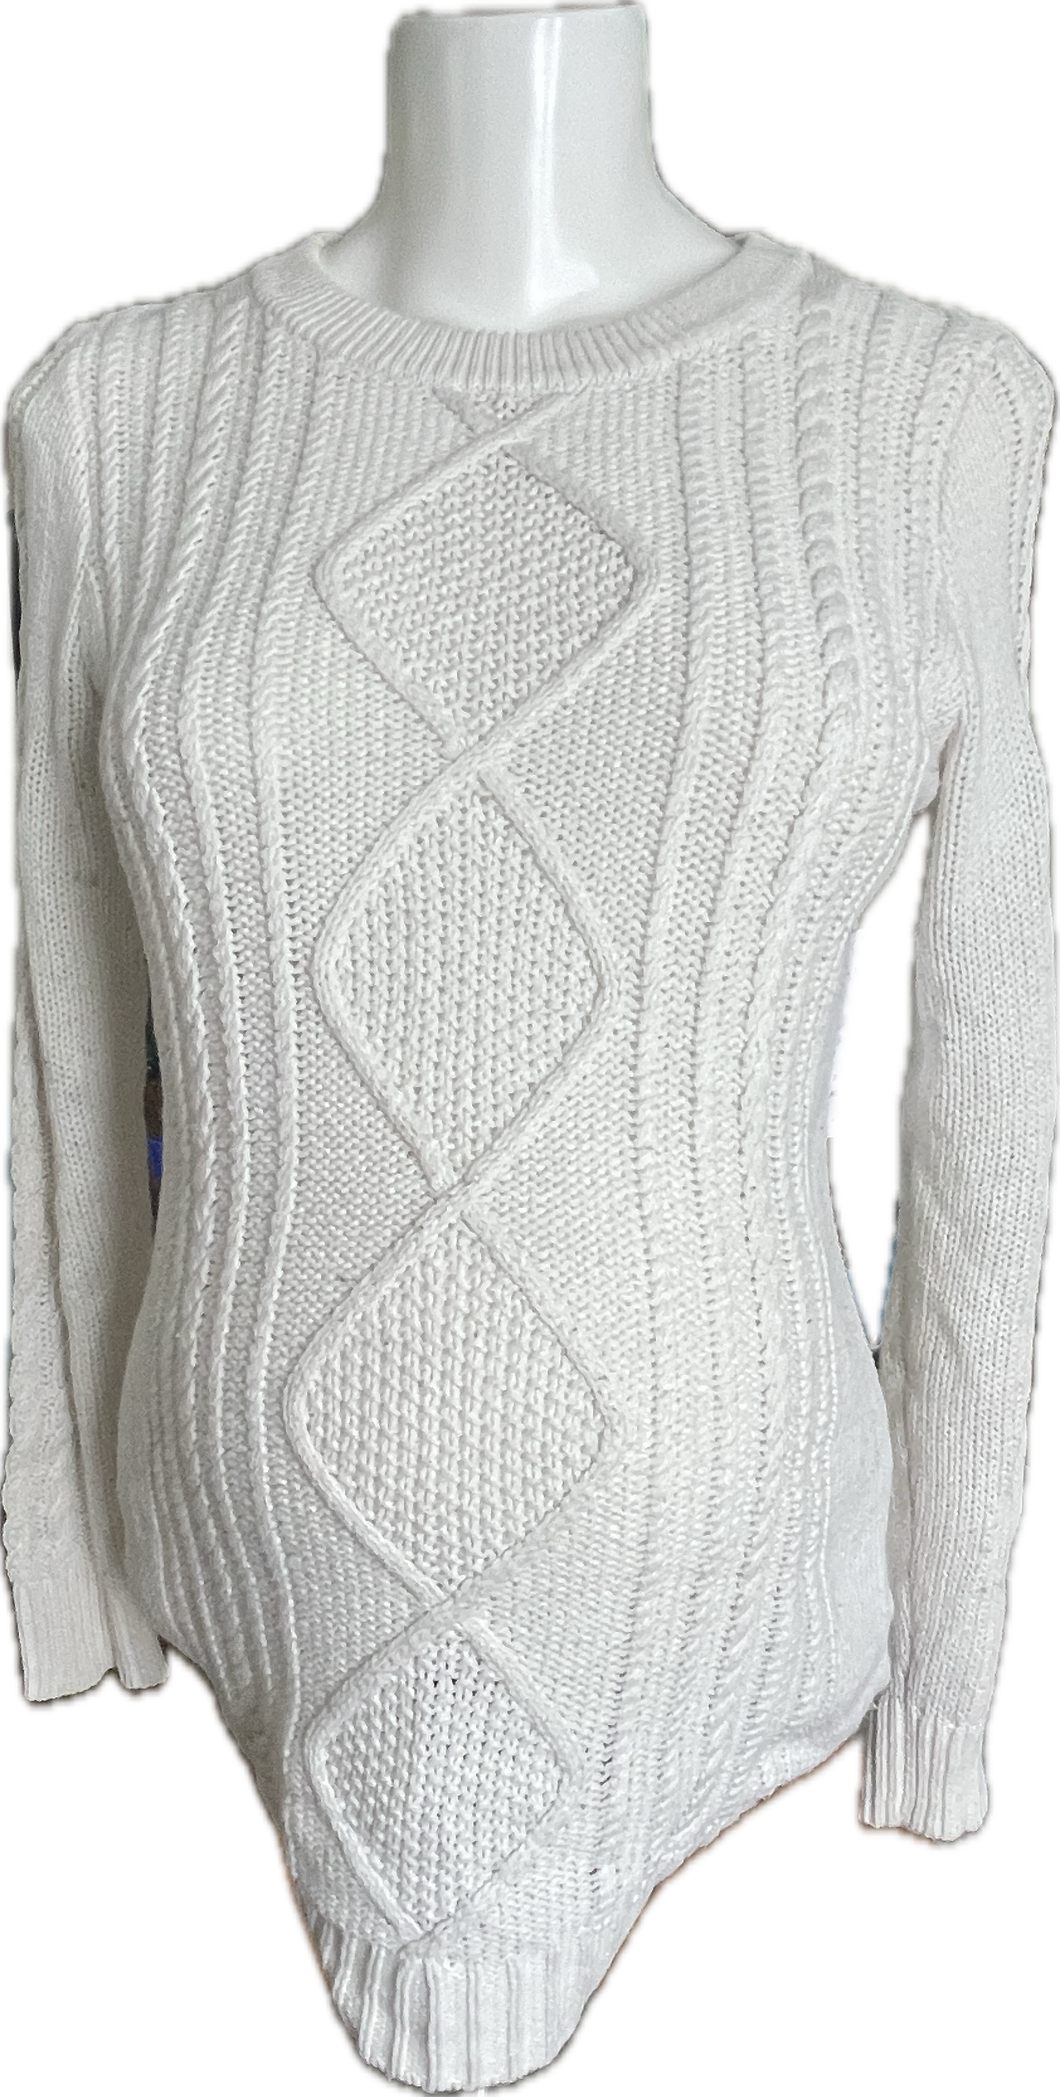 CLEARANCE S Old Navy Maternity Cable Knit Sweater in Cream